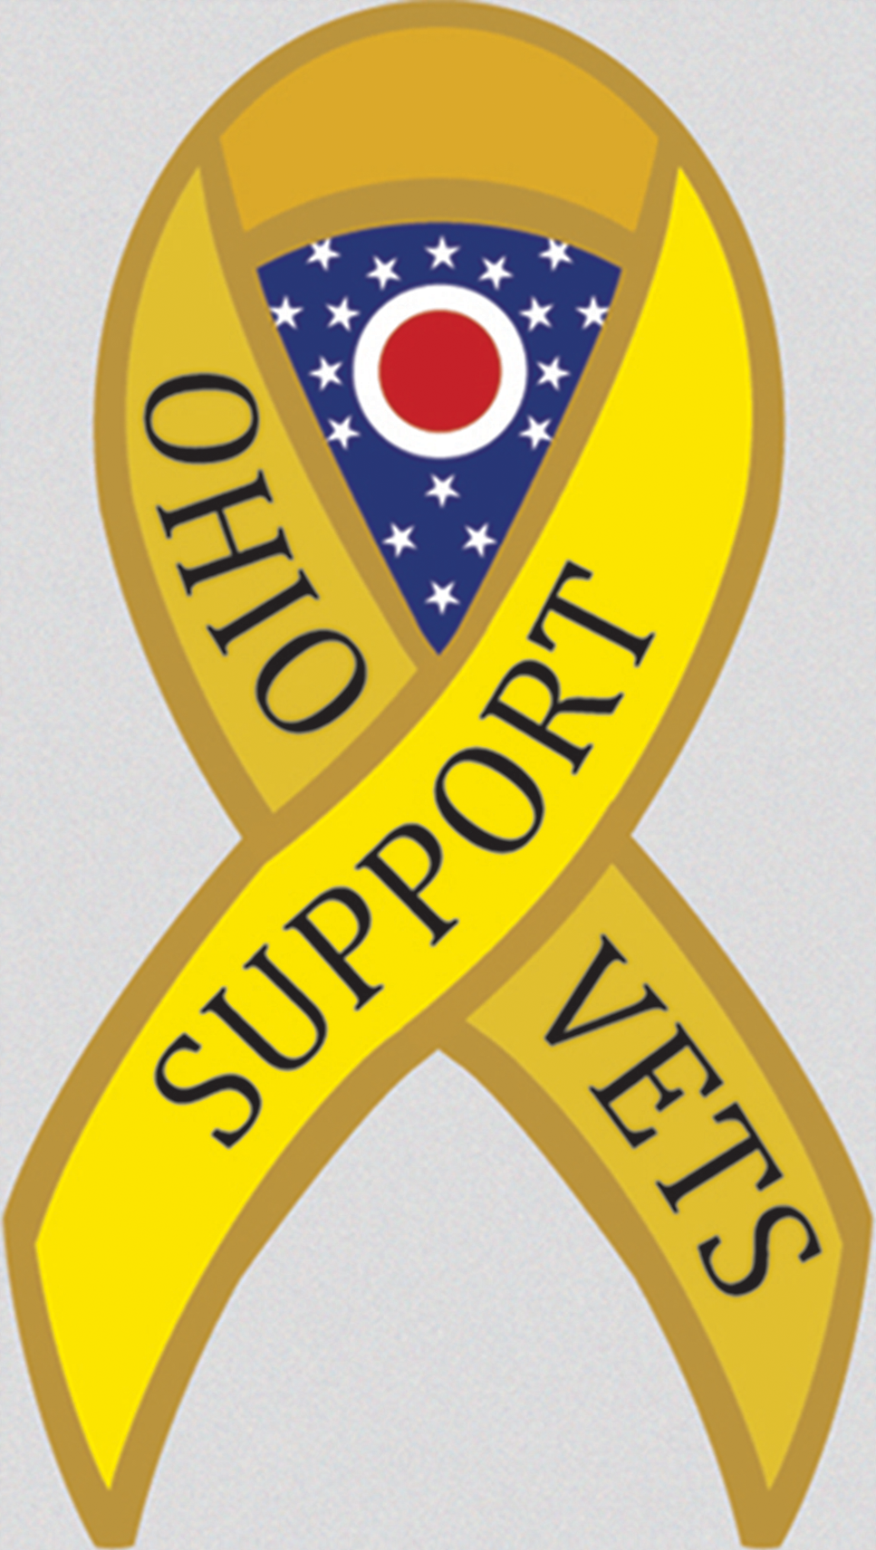 Support Ohio Vets logo decal